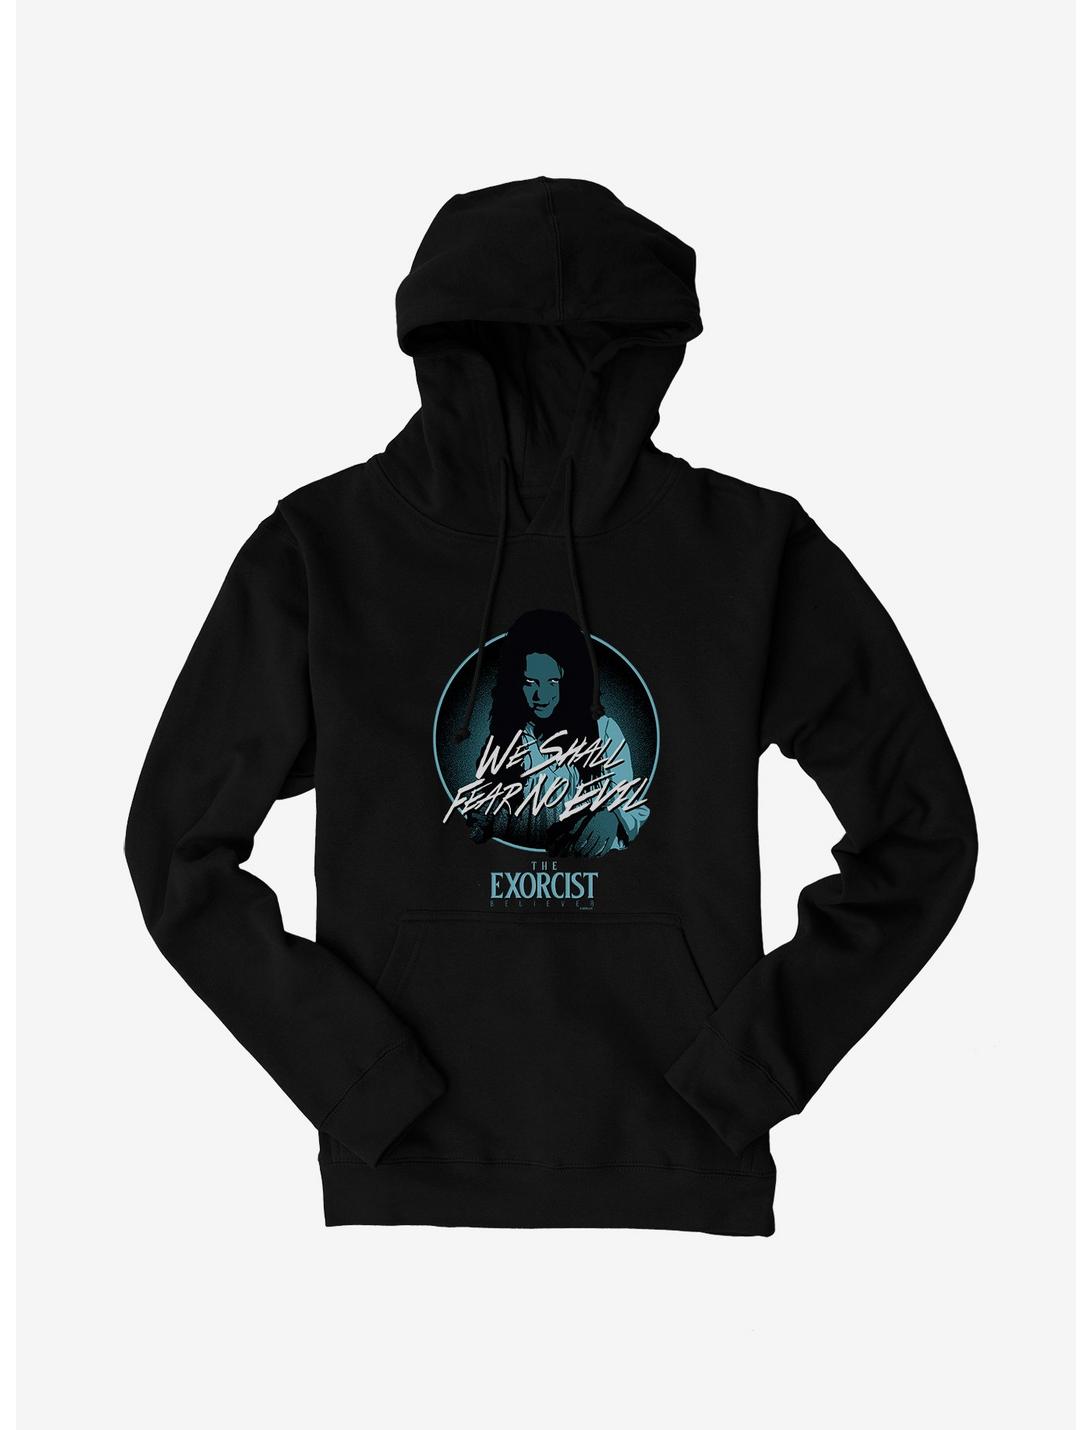 The Exorcist Believer We Shall Fear No Evil Hoodie, BLACK, hi-res